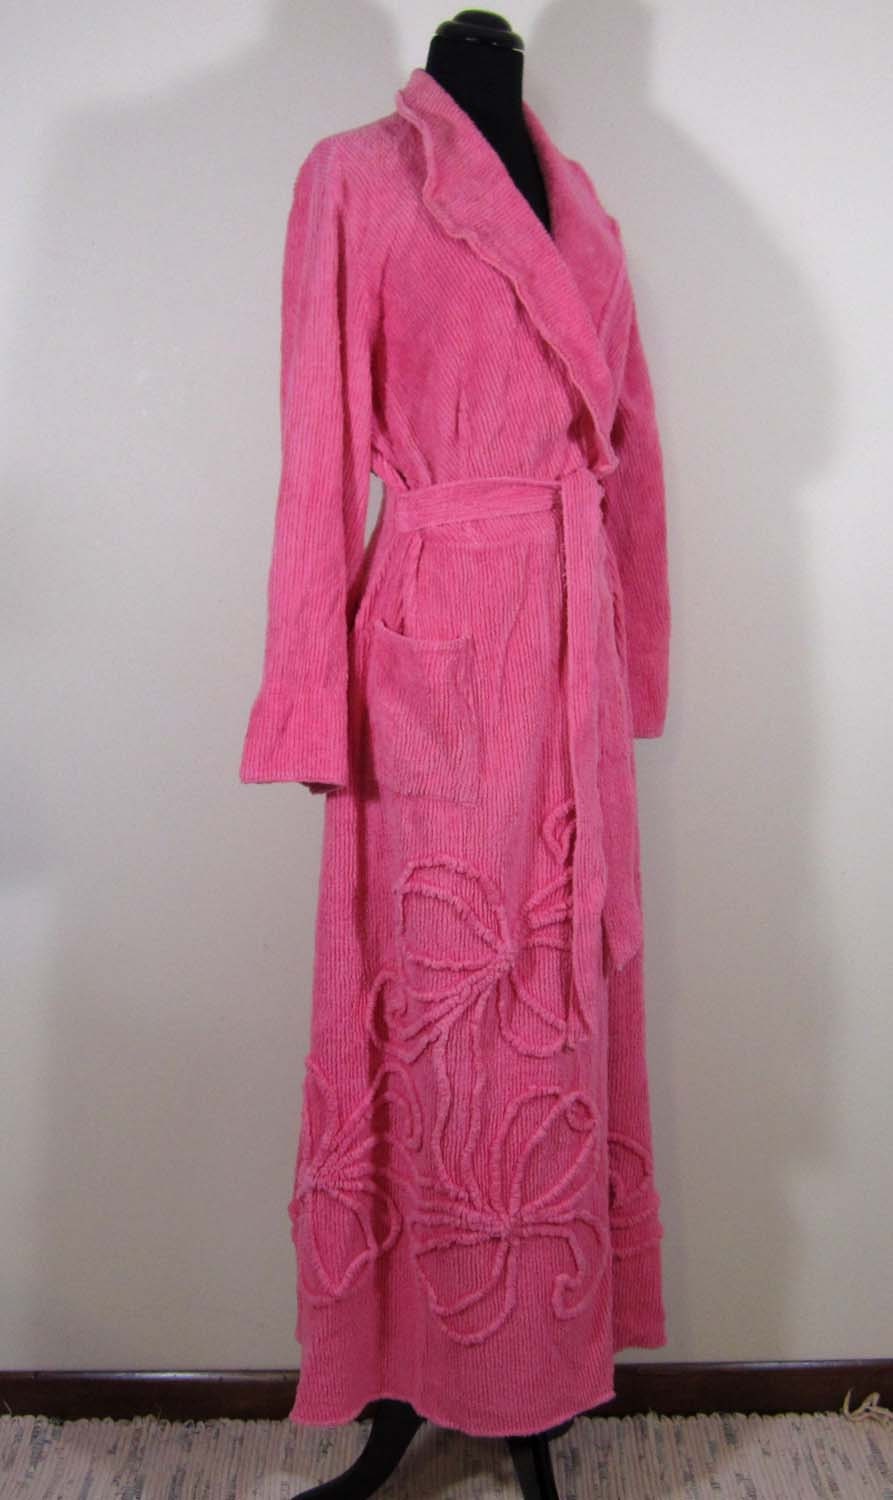 Vintage Pink Chenille Robe Floor length M-L by JanesVintage